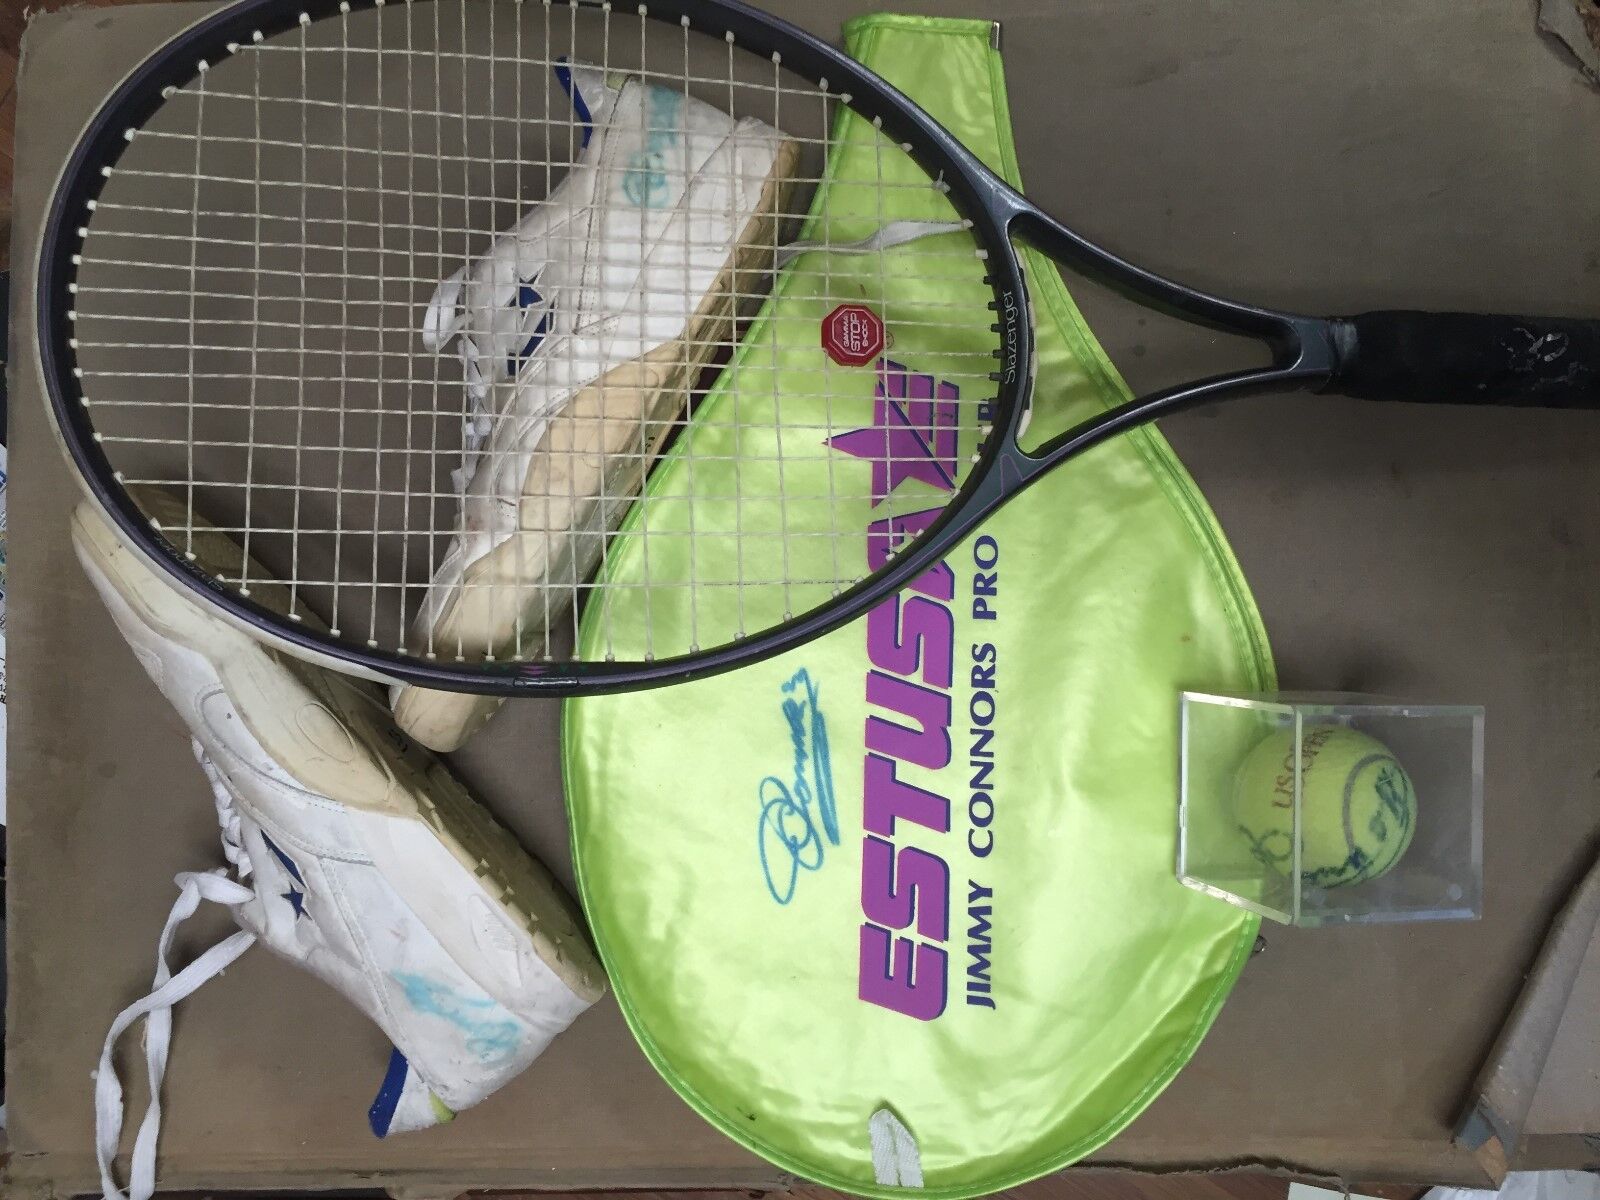 C. 1990'S JIMMY CONNORS SIGNED GAME WORN SNEAKERS, U.S. OPEN BALL,RACKET & COVER Без бренда